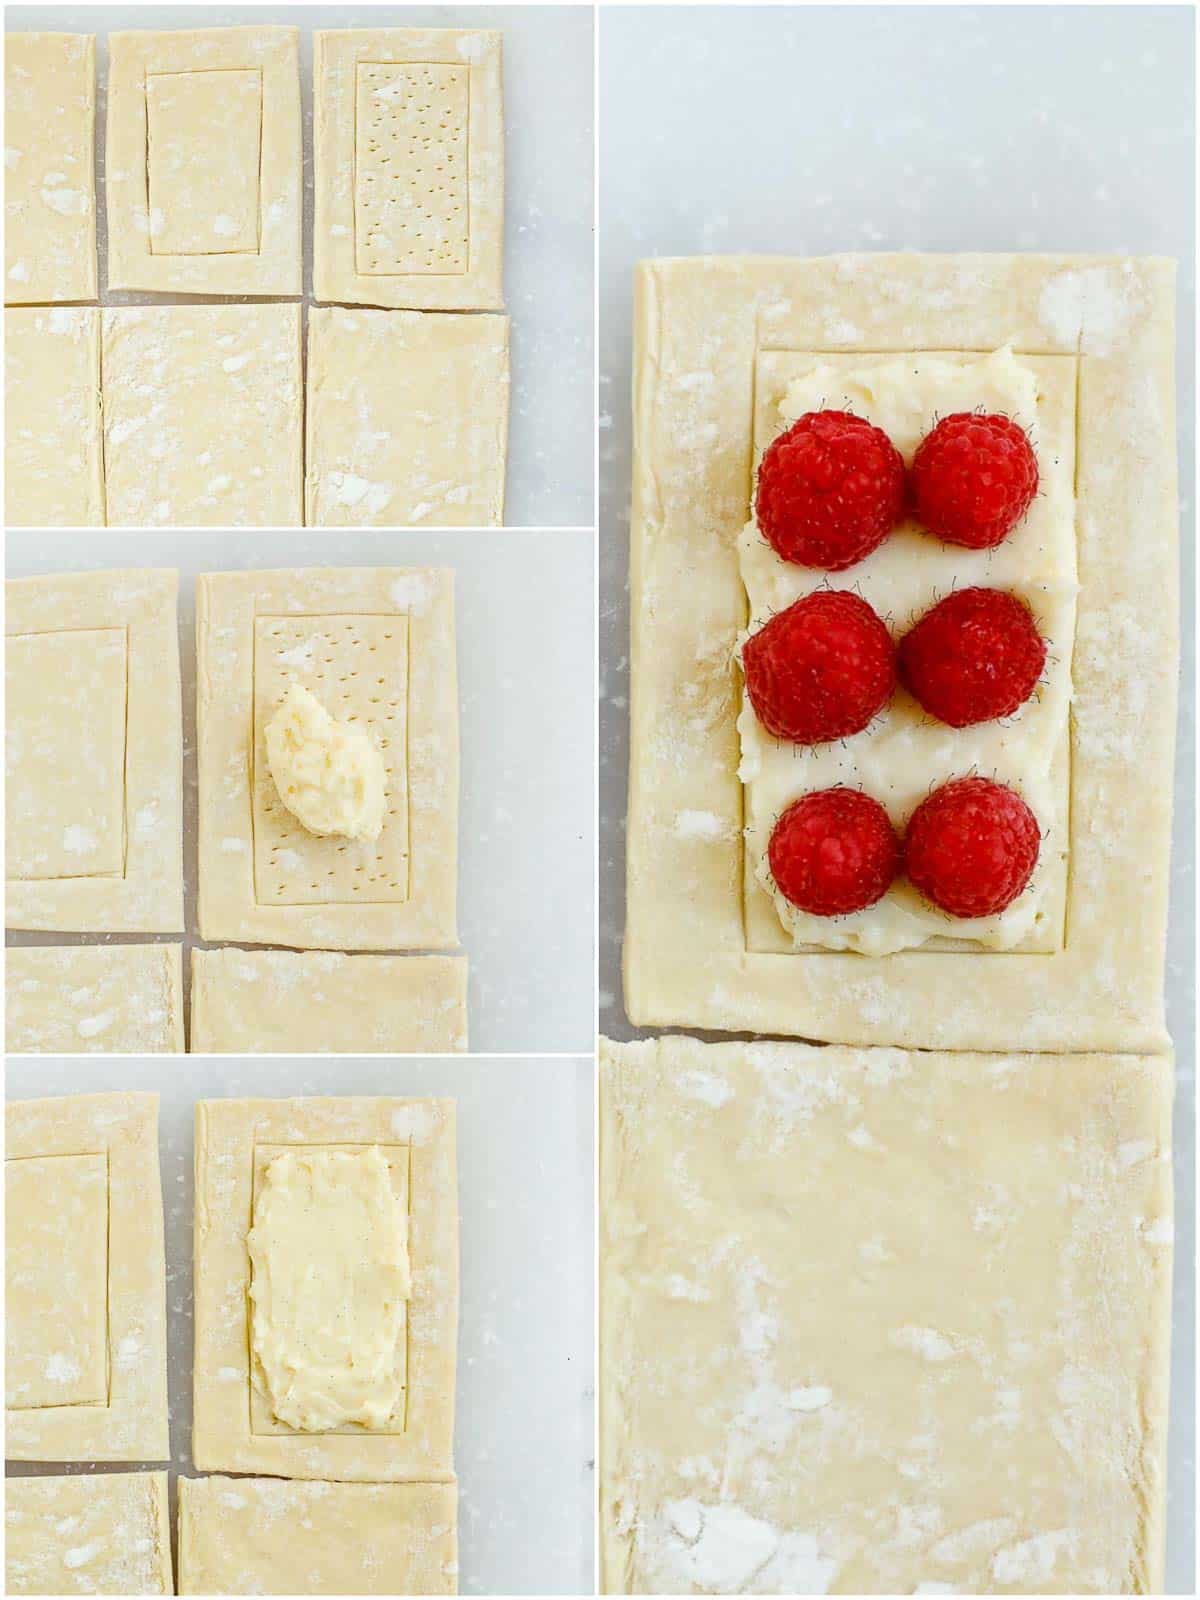 puff pastry sheet with pastry cream and raspberry before baking.